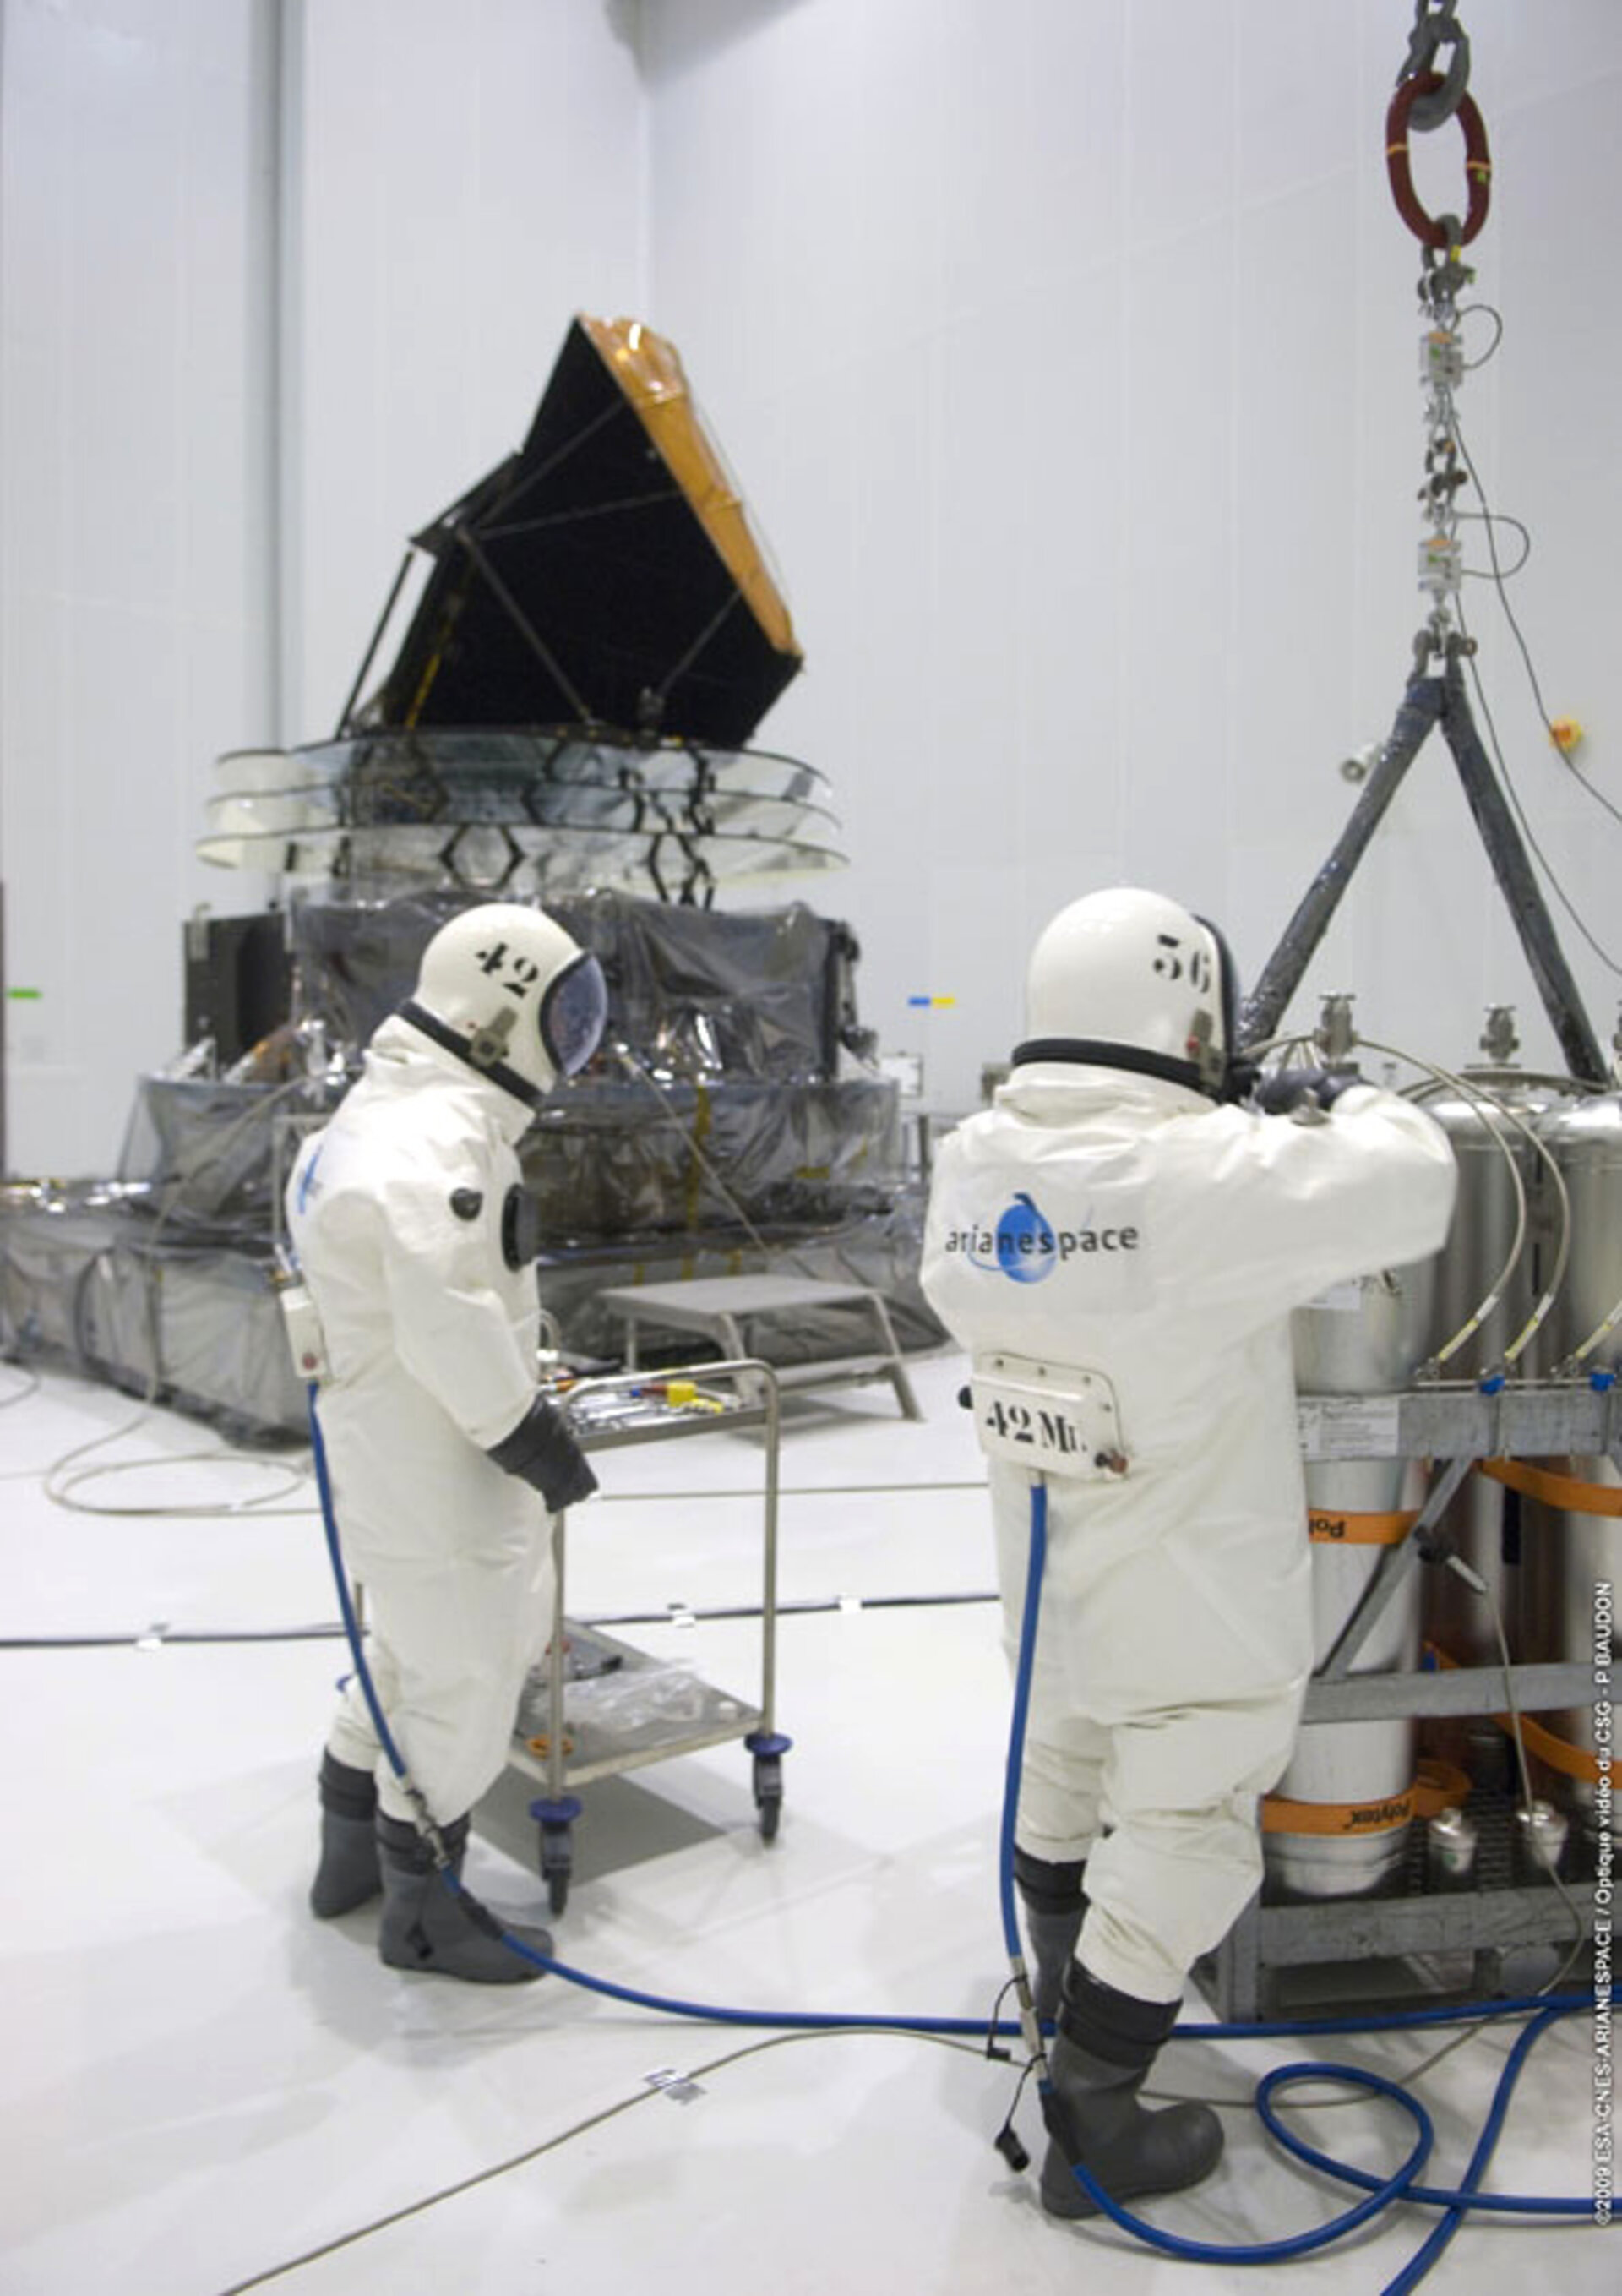 Current satellite fuelling requires special safety suits